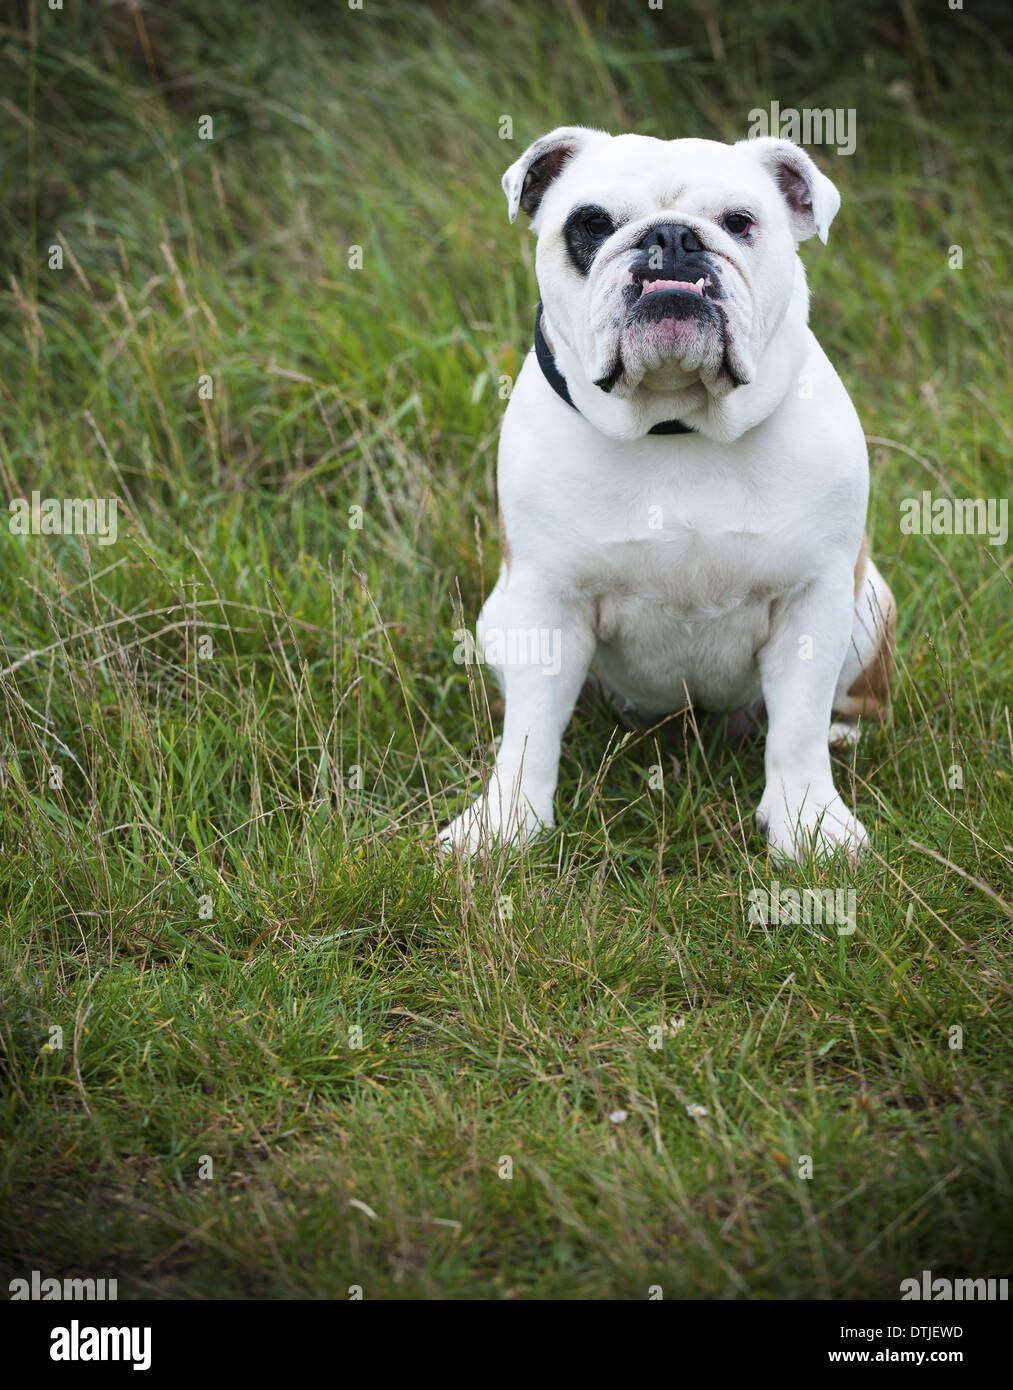 A white English Bulldog a pedigree dog with a snubbed nose sitting on his haunches on a lawn England Stock Photo